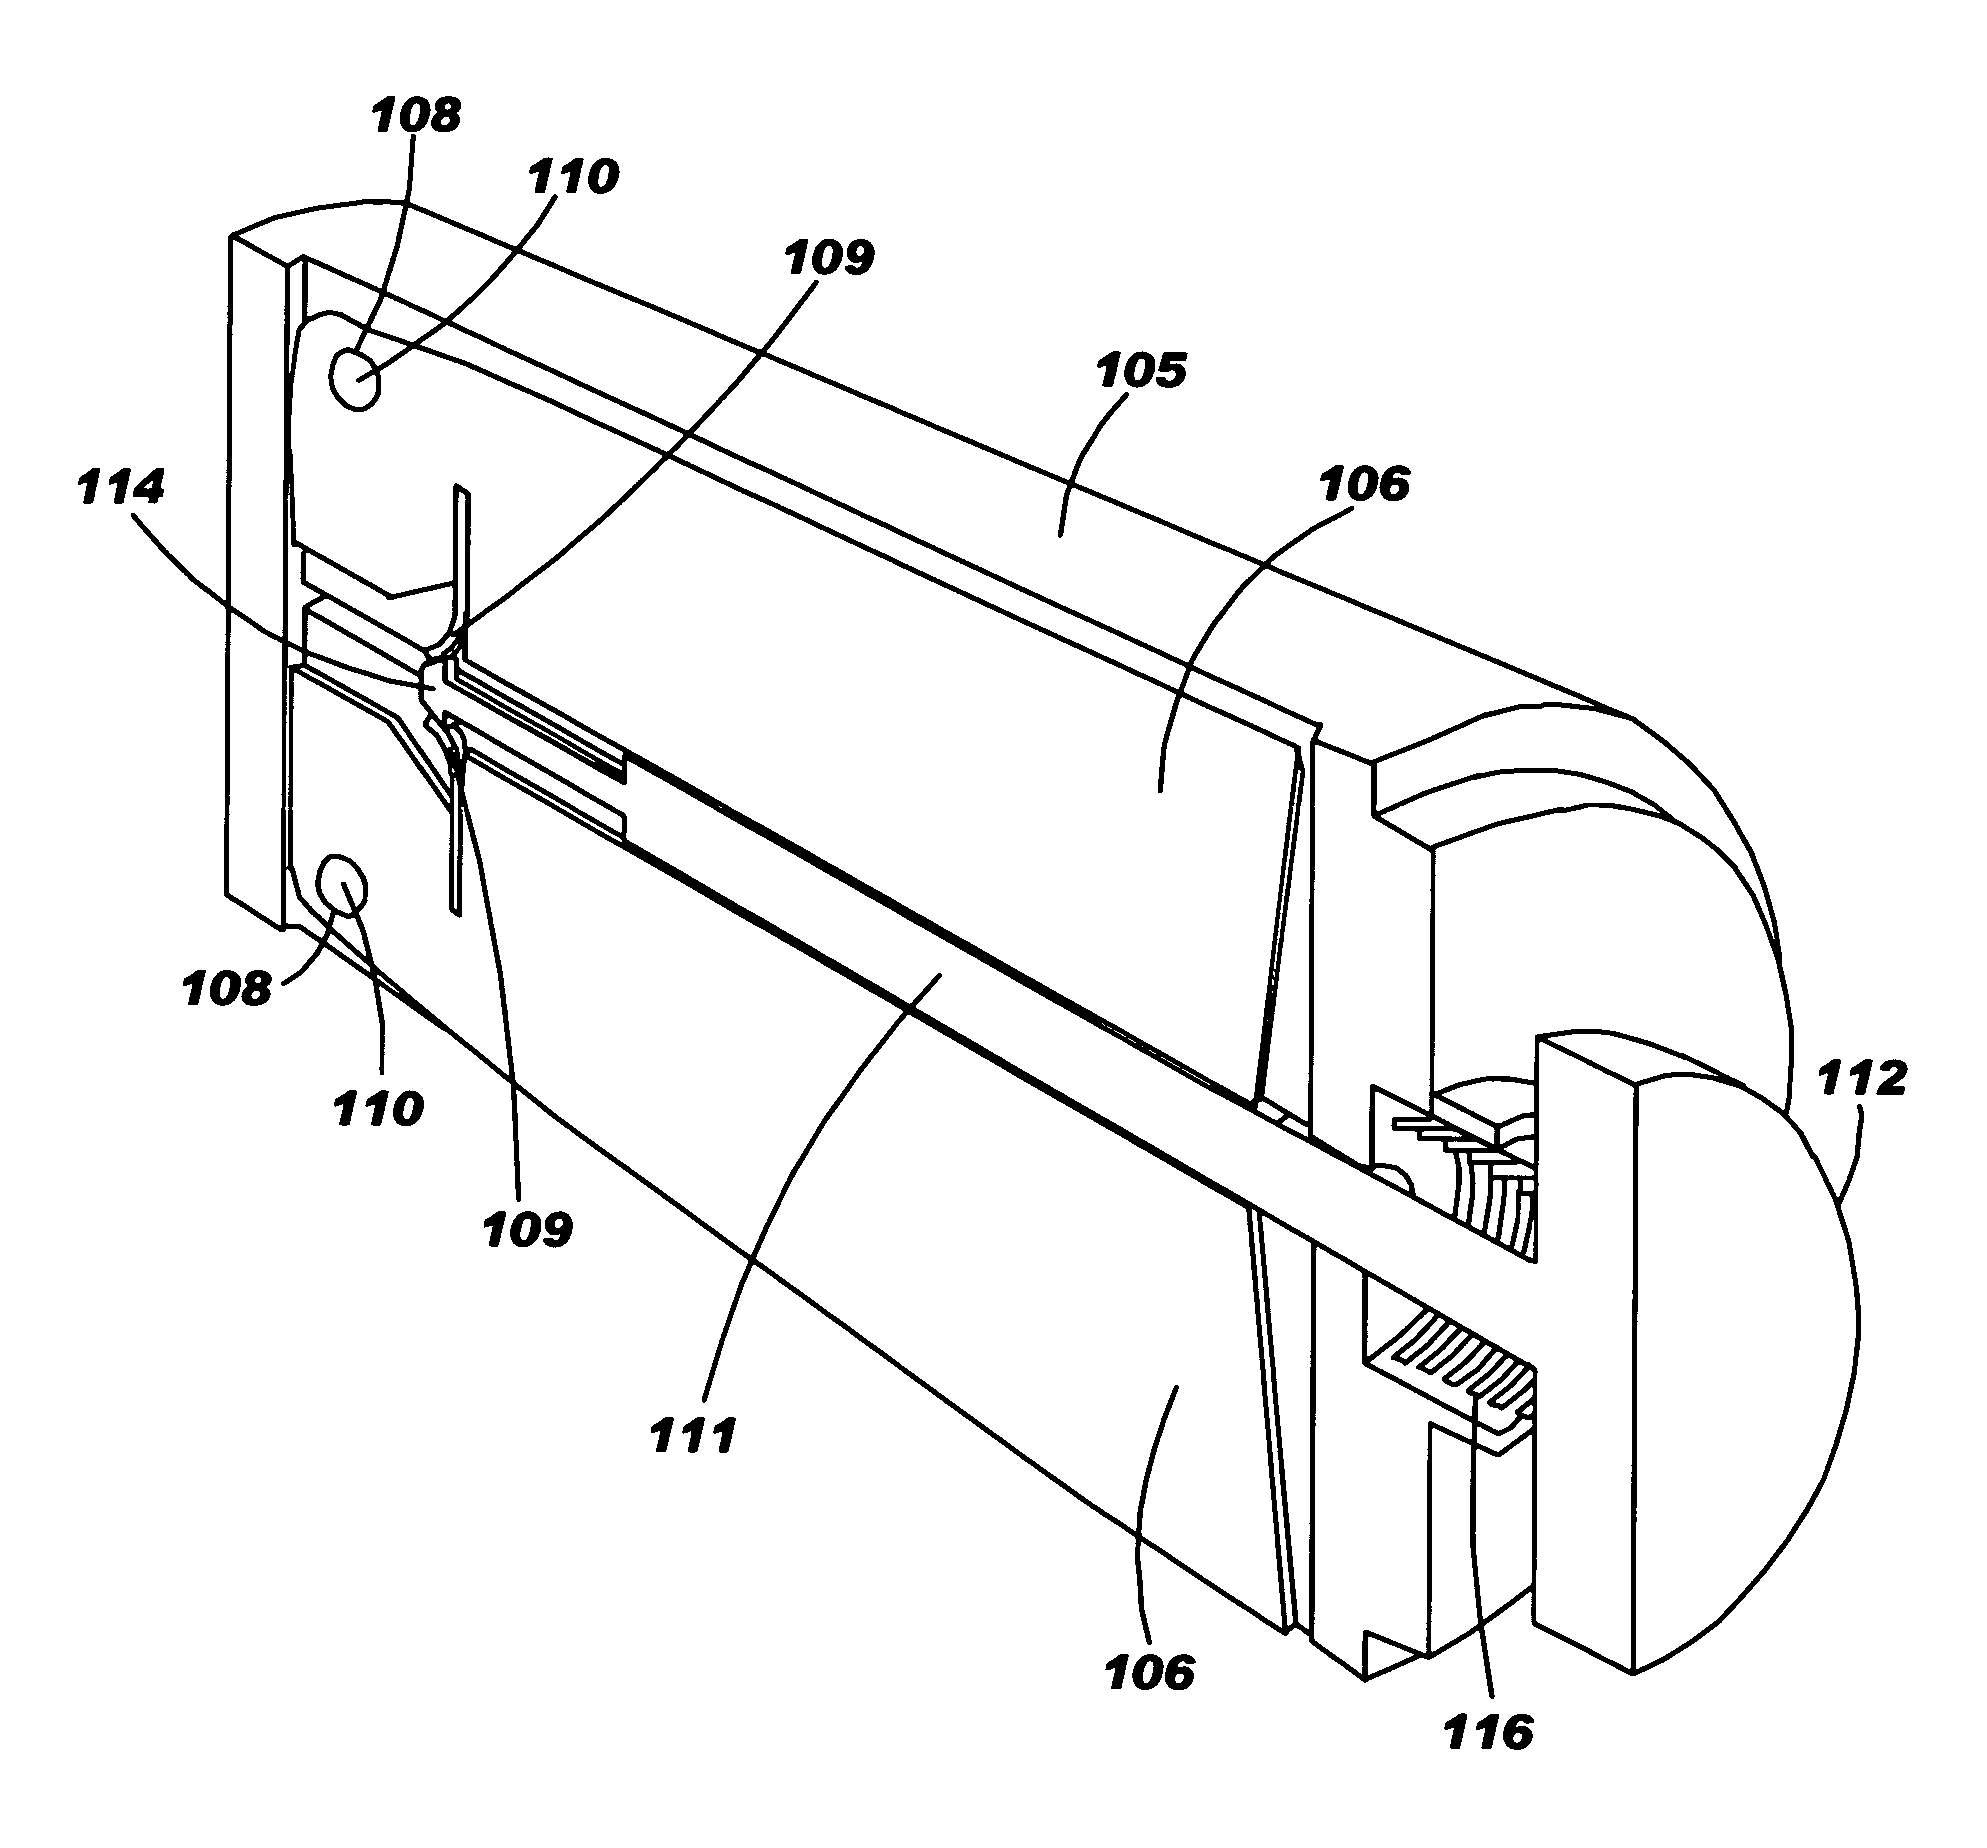 Full-bore artillery projectile fin development device and method